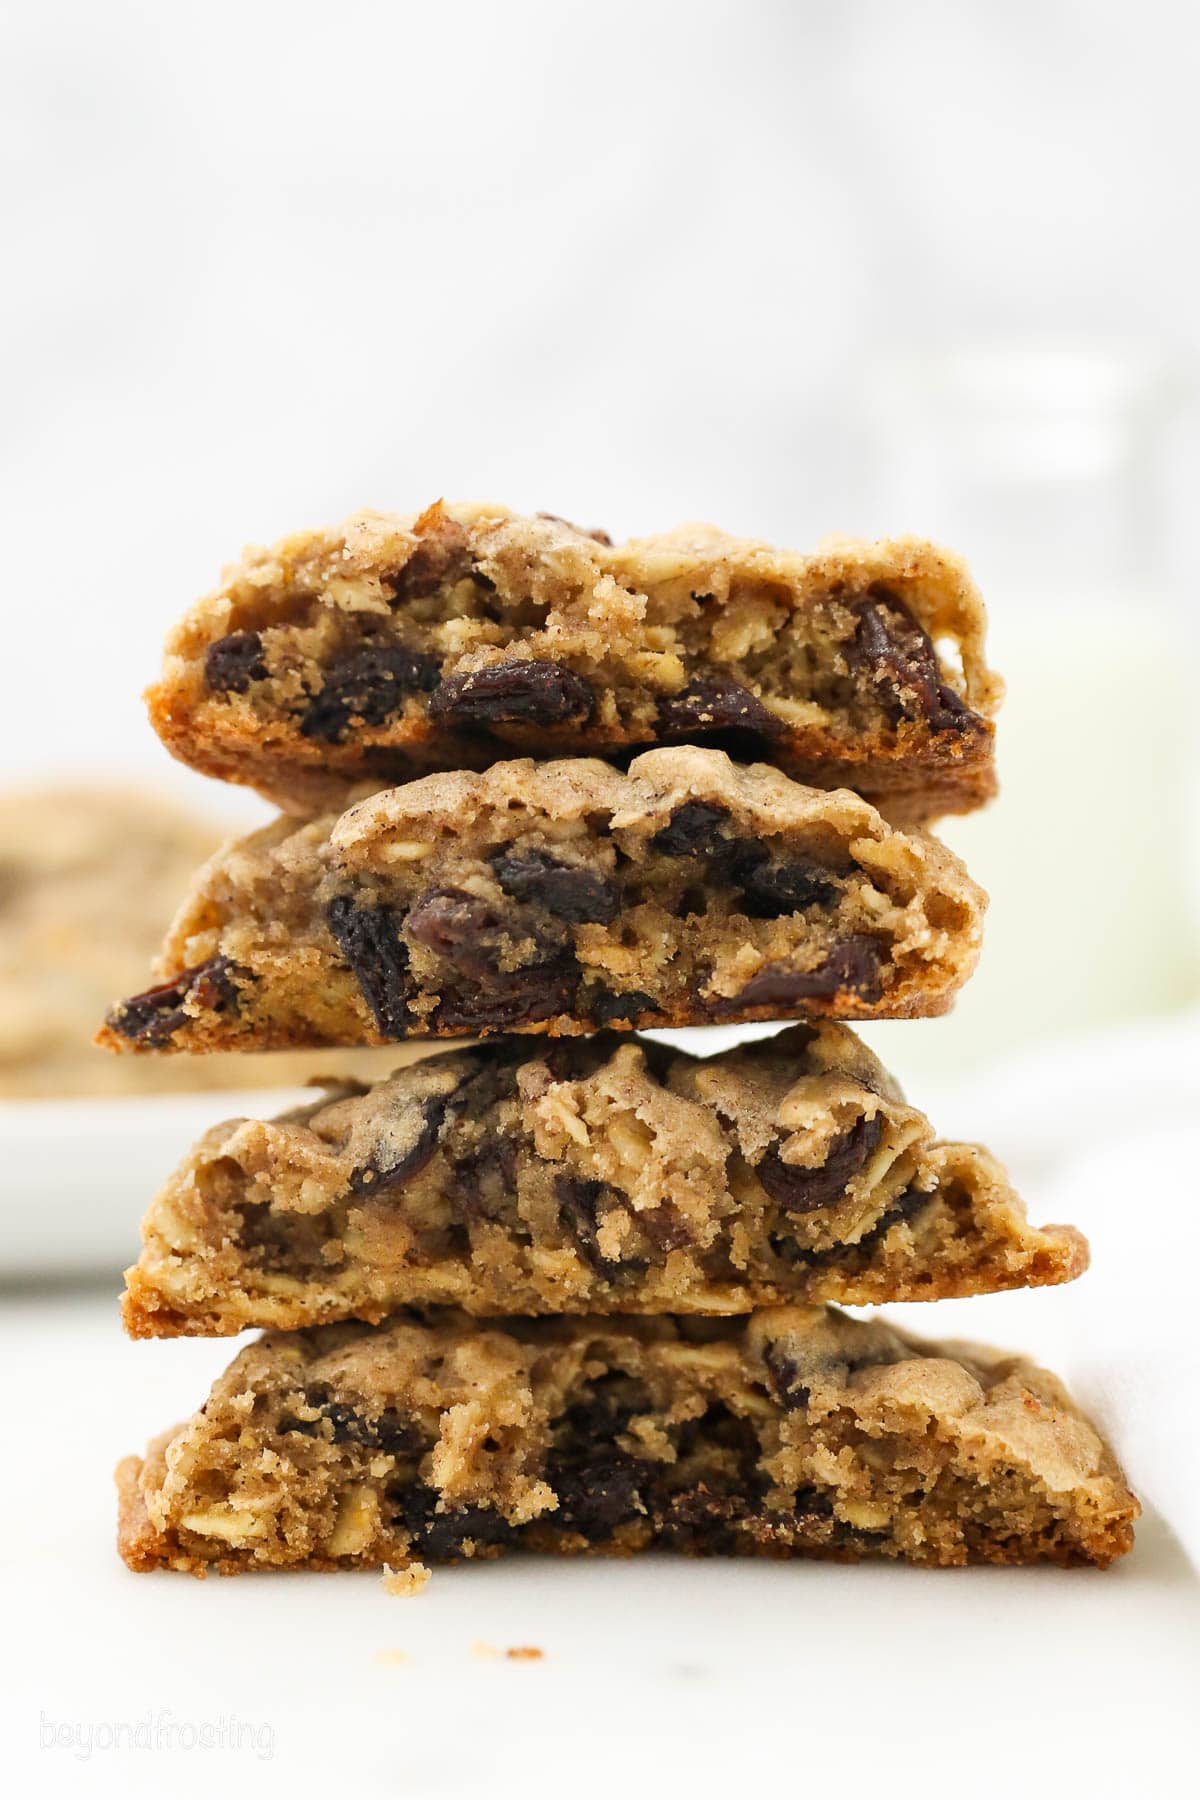 A stack of 4 halves of Oatmeal Raison cookies to show the inside